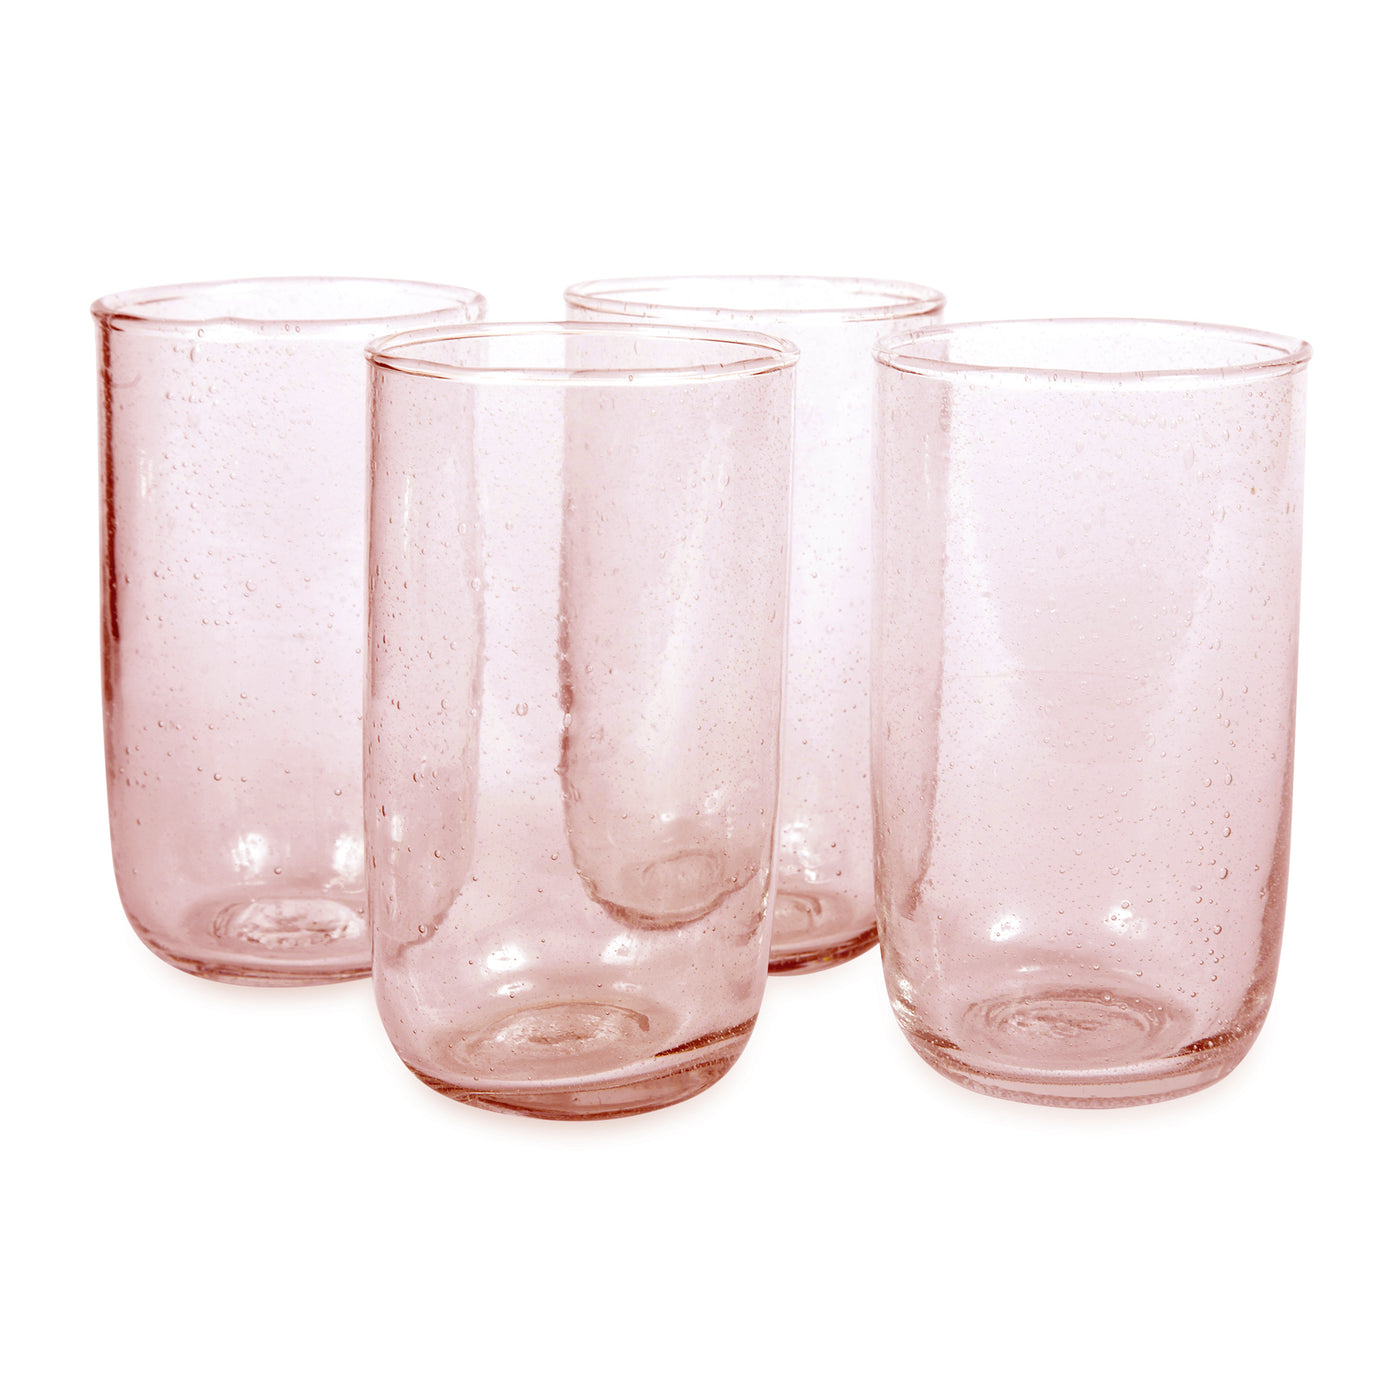 Tall Seeded Glasses in Pink